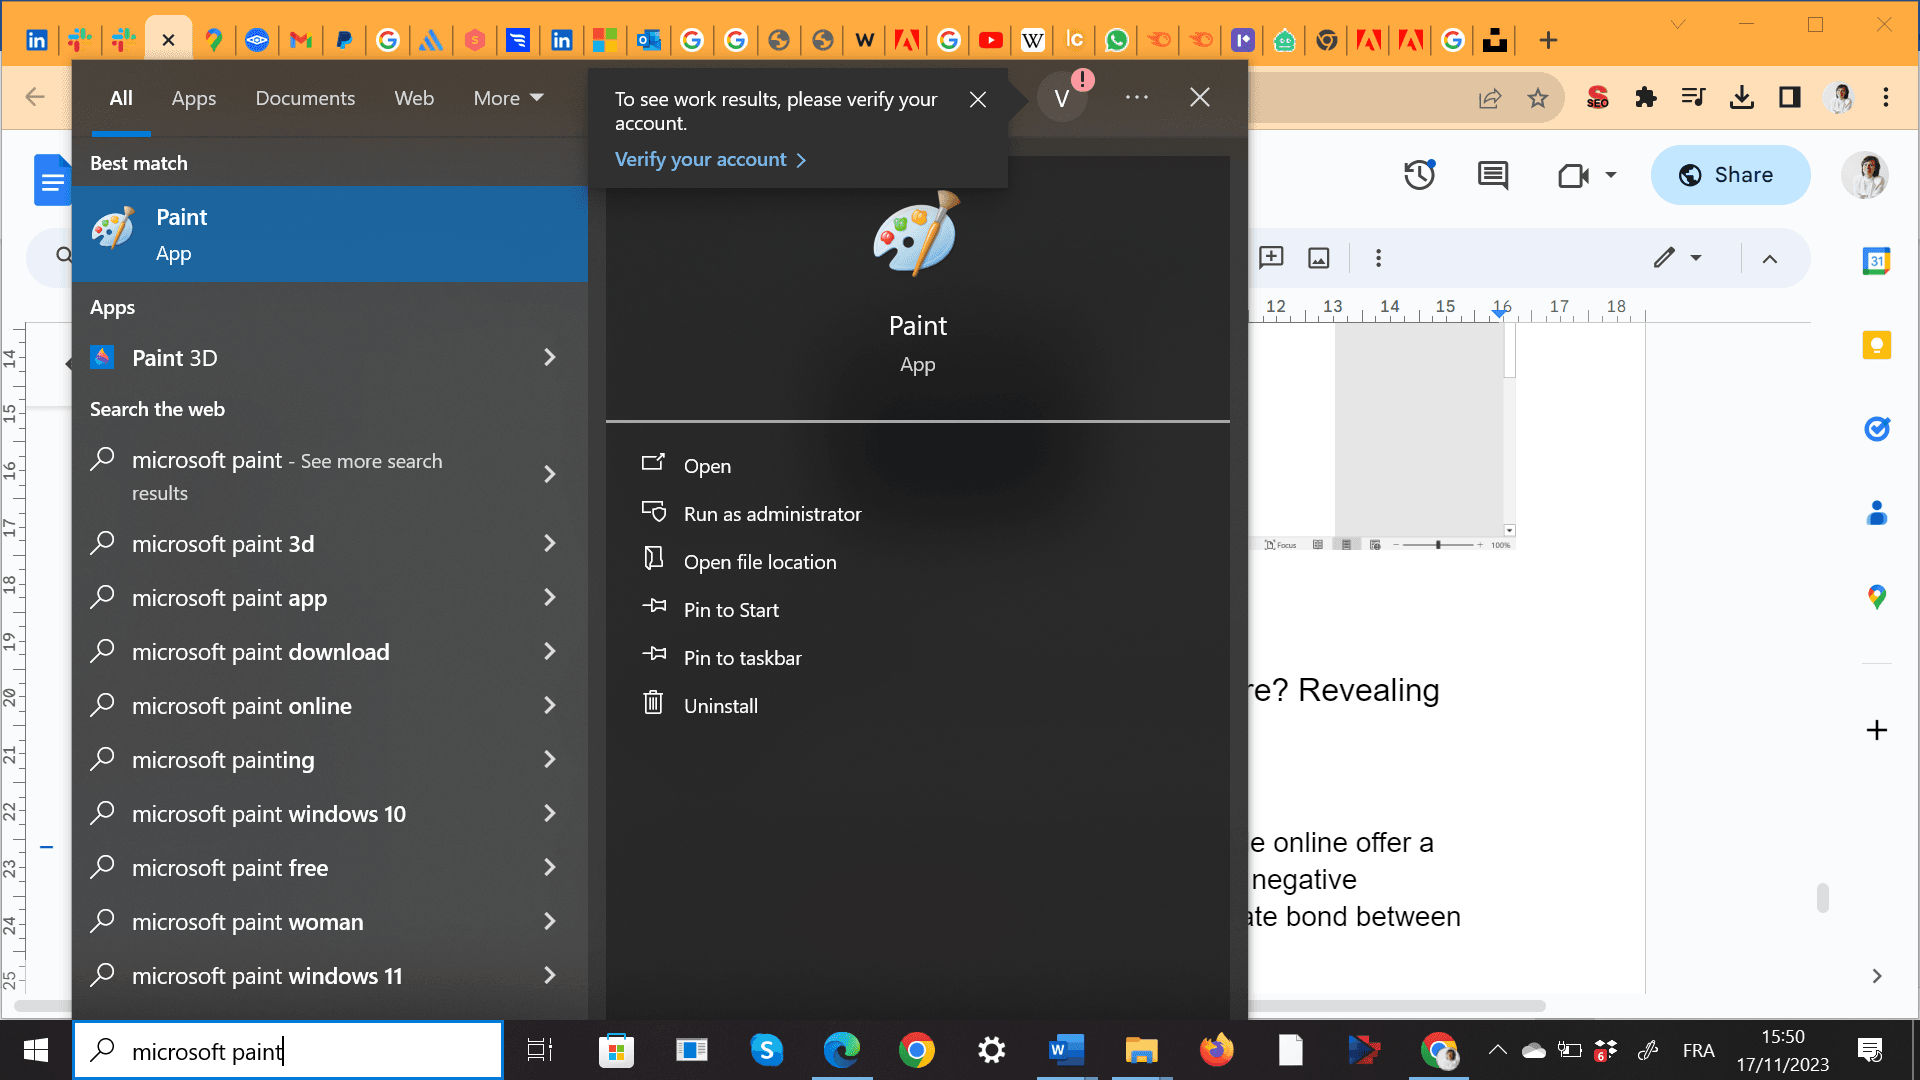 Search for the Paint app in the menu below